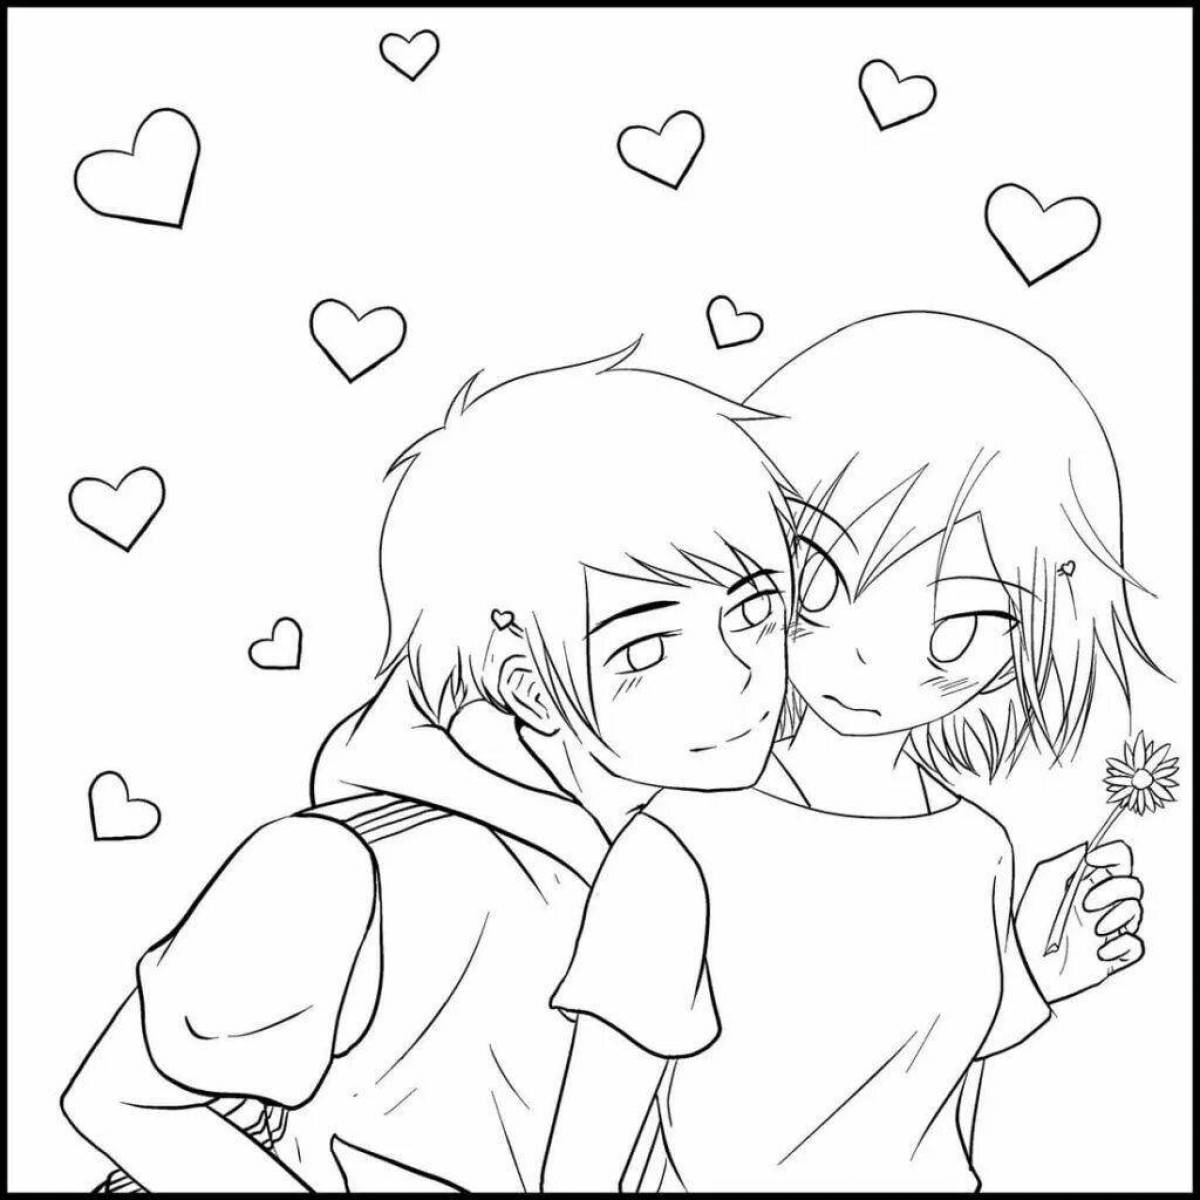 Violent anime kiss coloring page